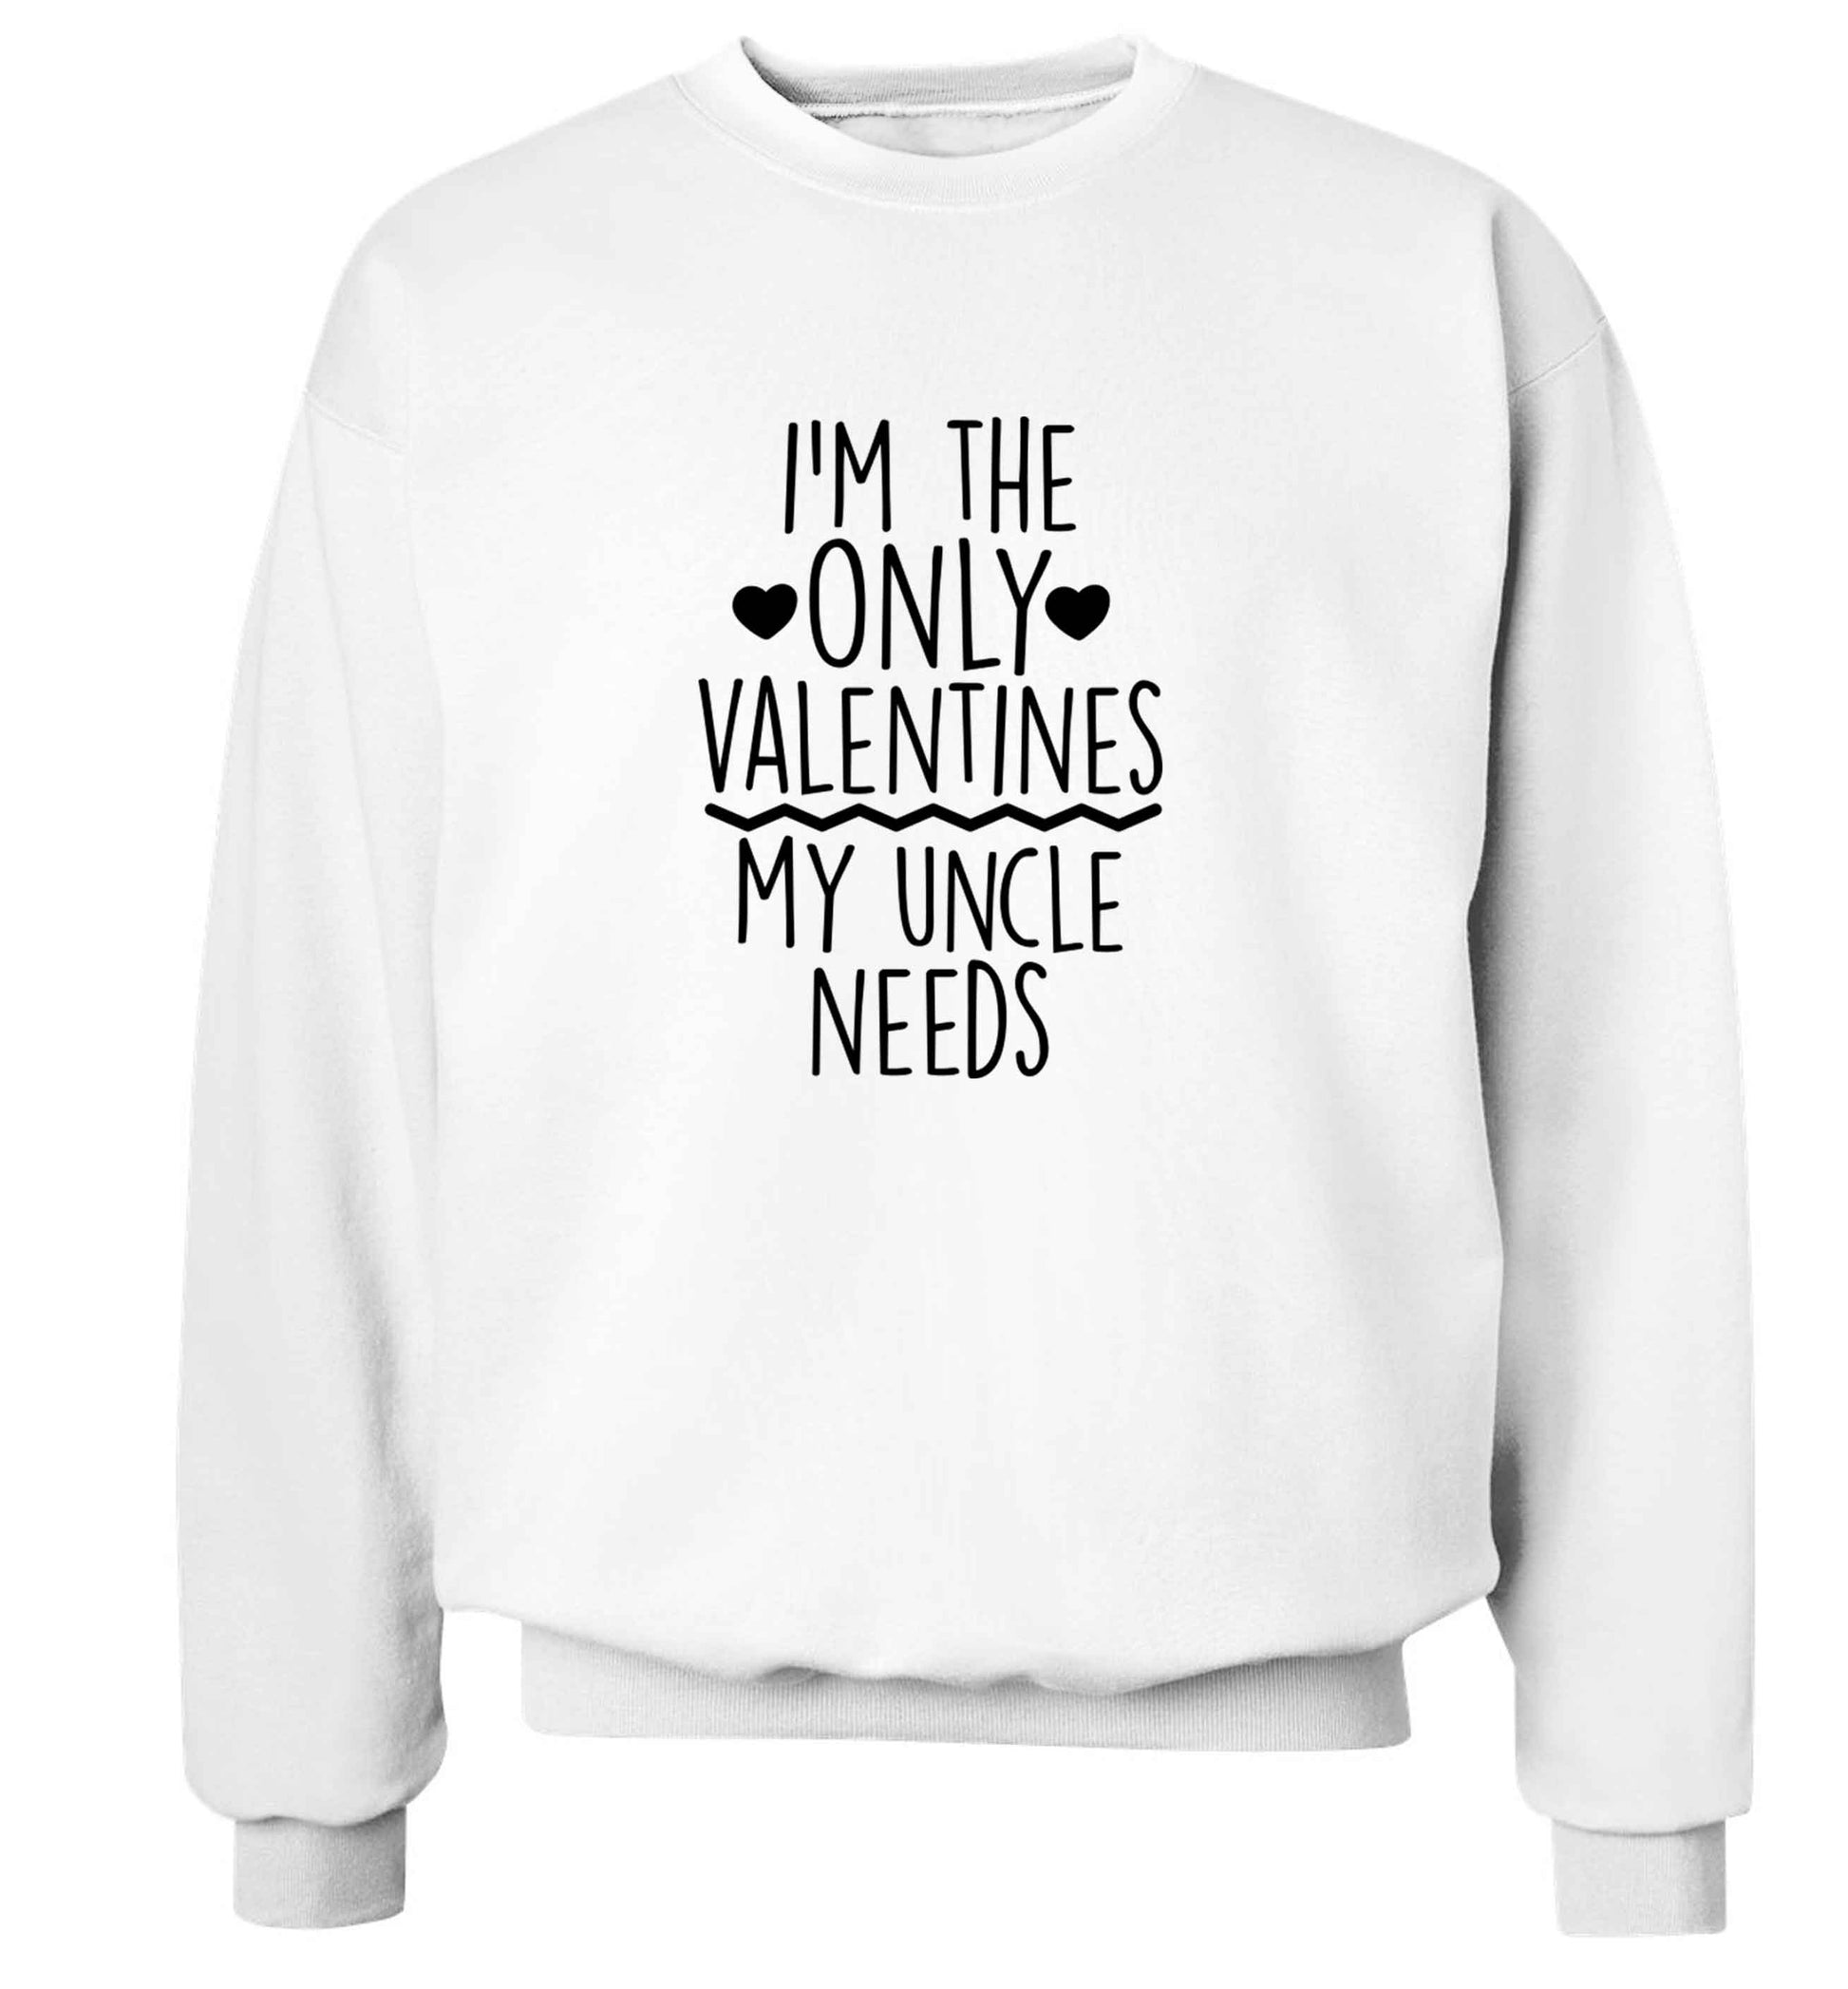 I'm the only valentines my uncle needs adult's unisex white sweater 2XL